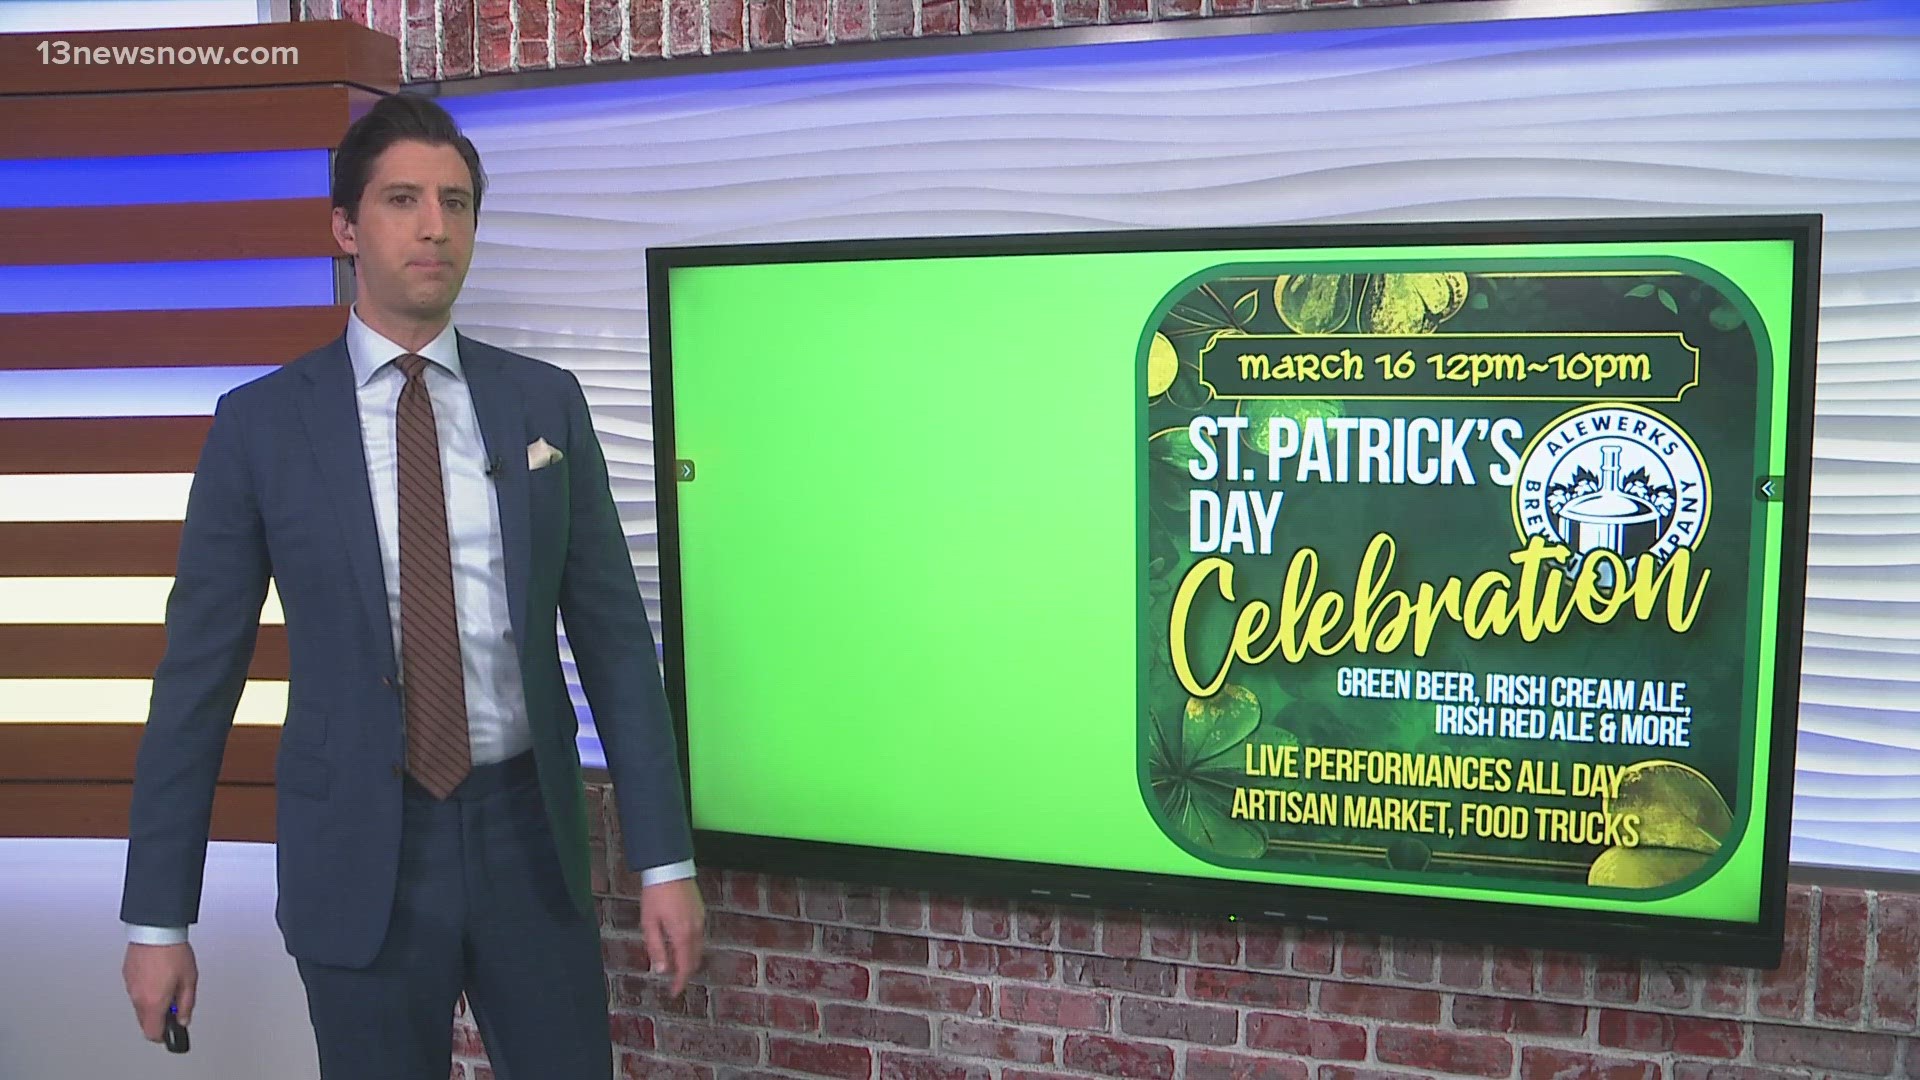 There will be plenty of great events to celebrate St. Patrick's Day this weekend.